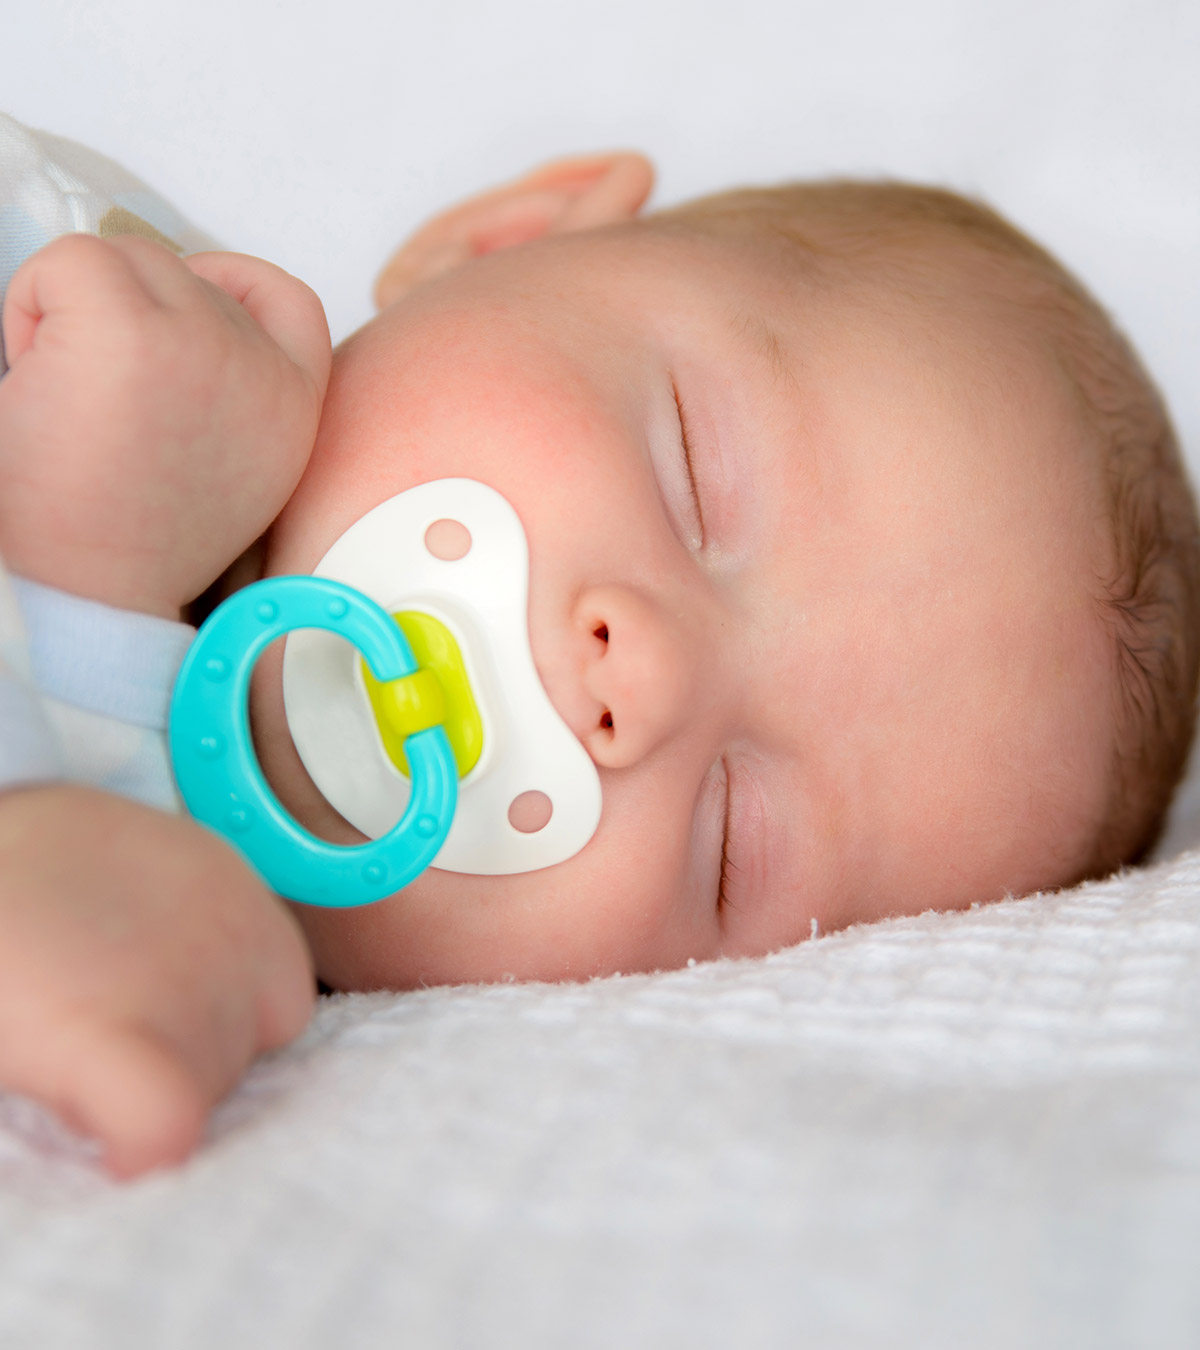 https://www.momjunction.com/wp-content/uploads/2015/05/15-Best-Baby-Pacifiers-For-You-To-Select-From1.jpg